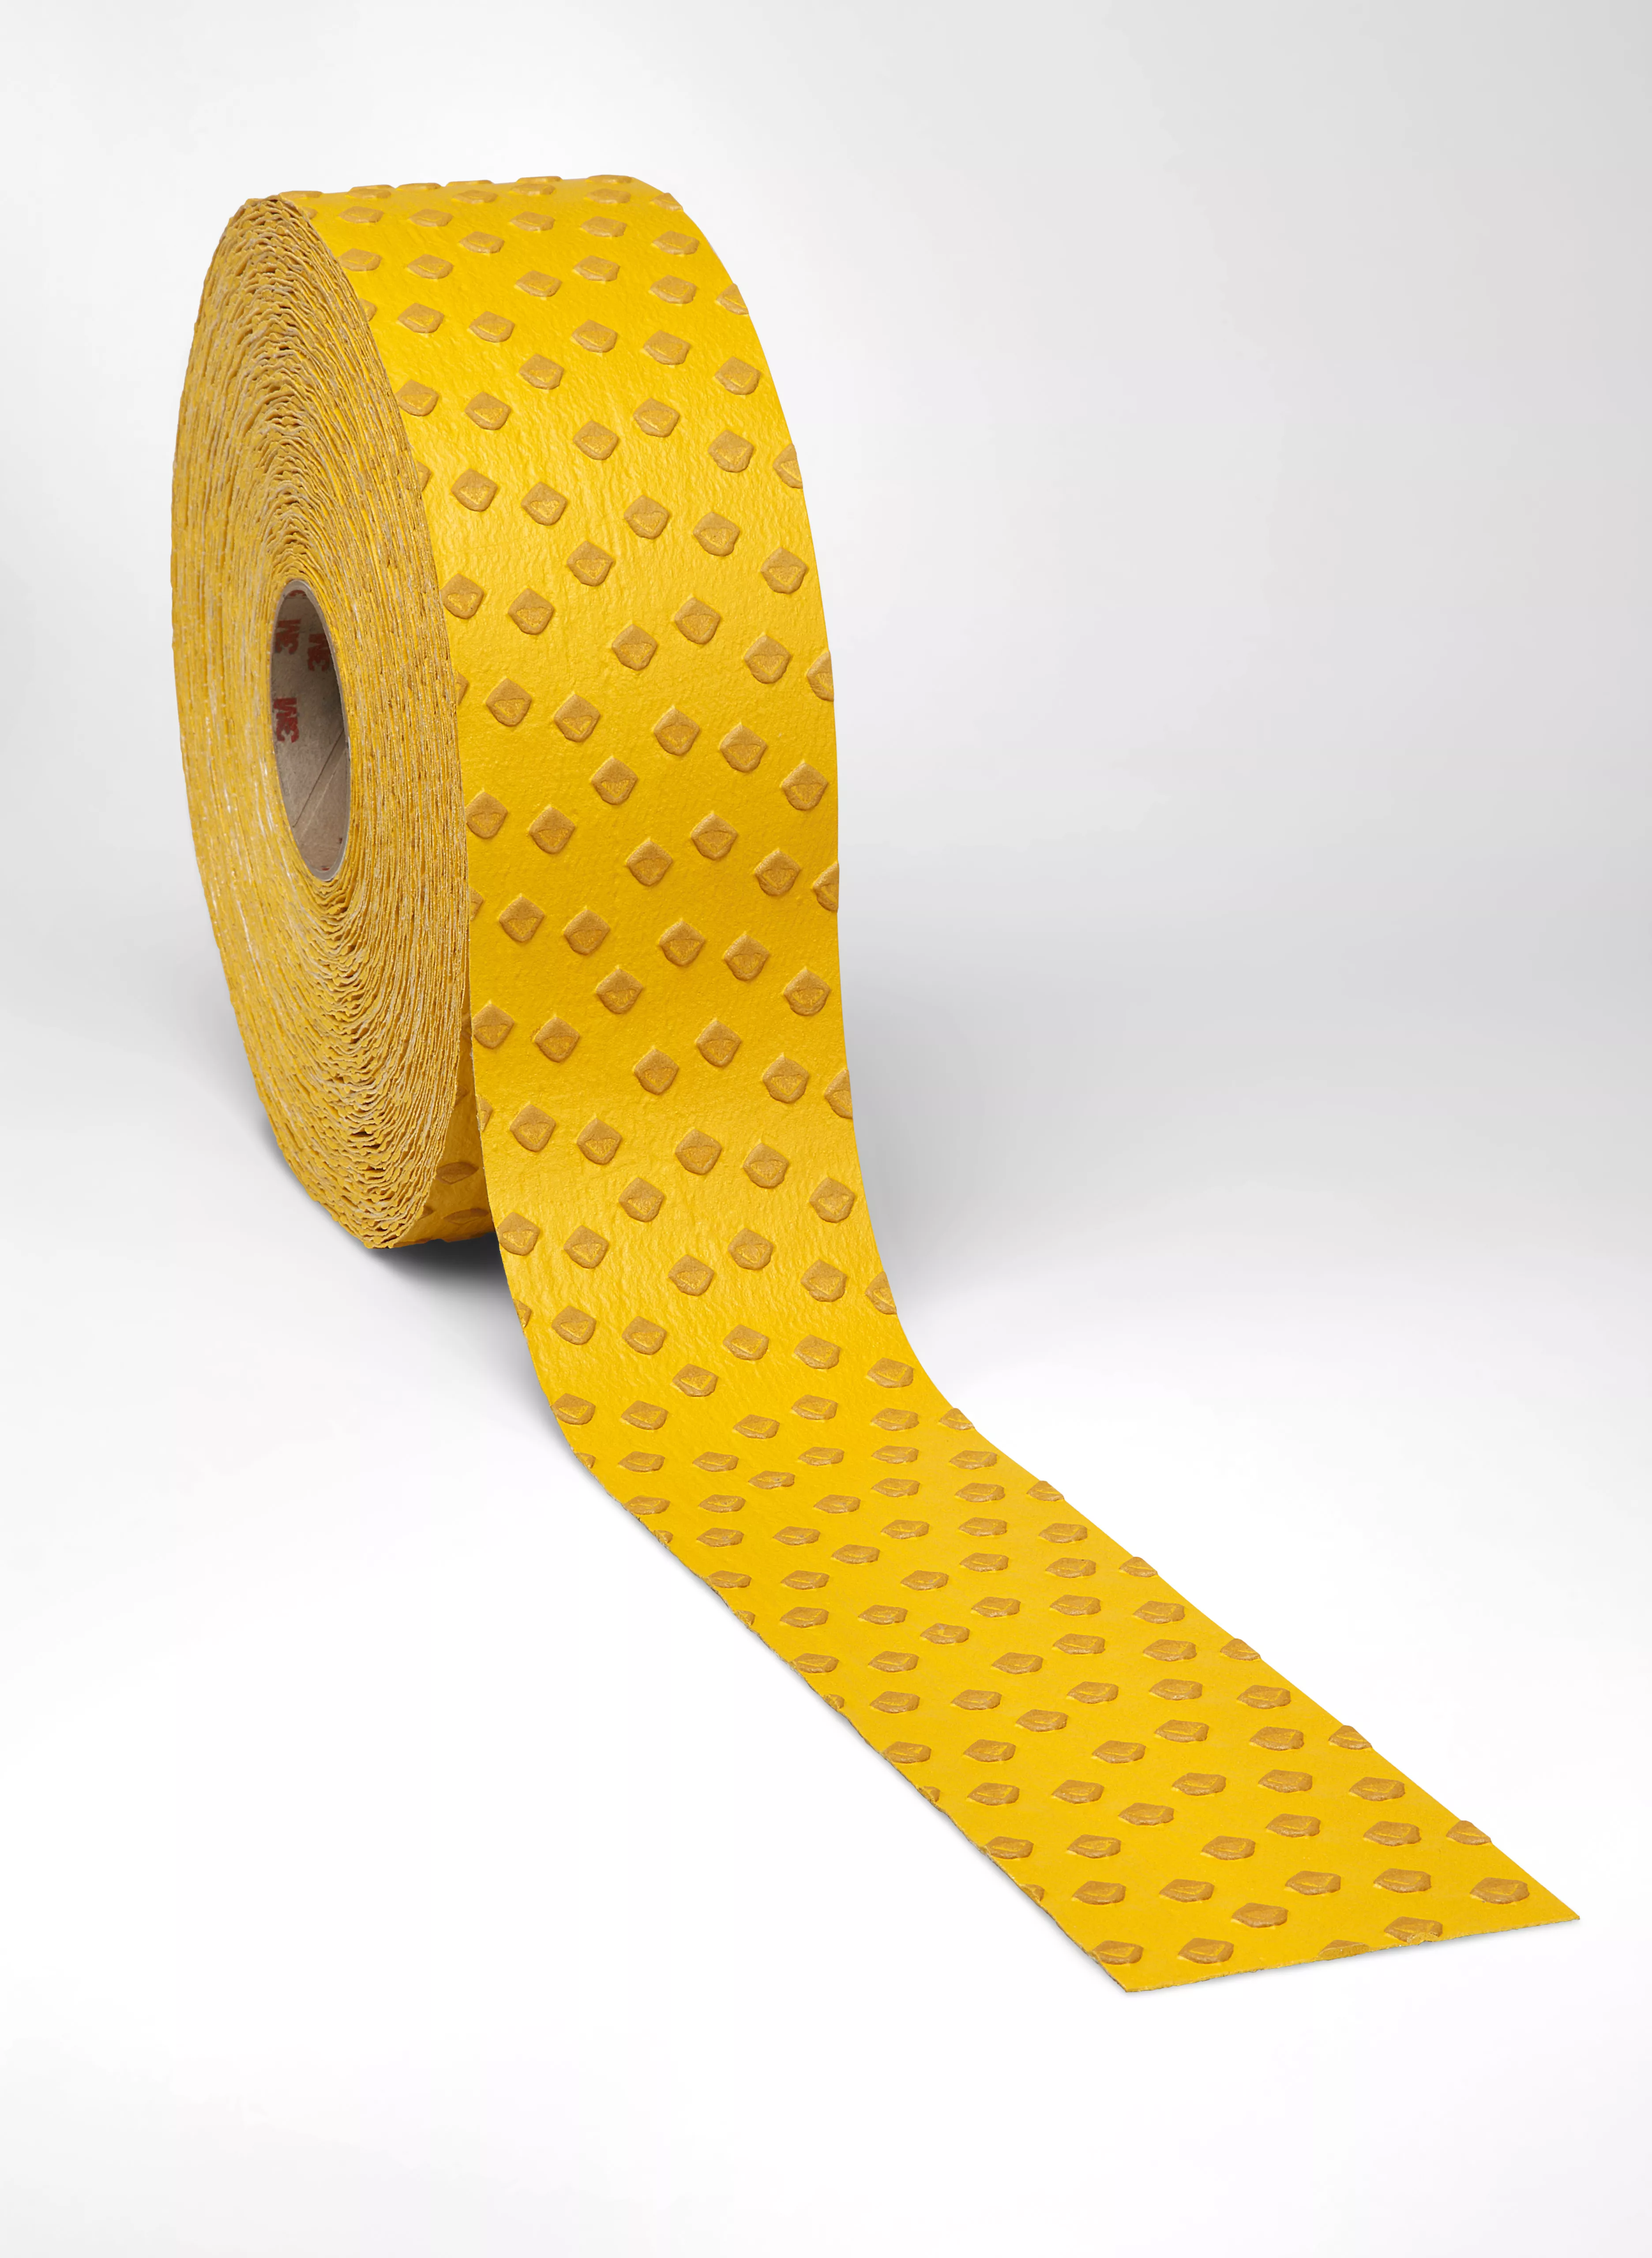 3M™ Stamark™ Removable Pavement Marking Tape A711, Yellow, 4 in x 120
yd, 36 roll bulk pack